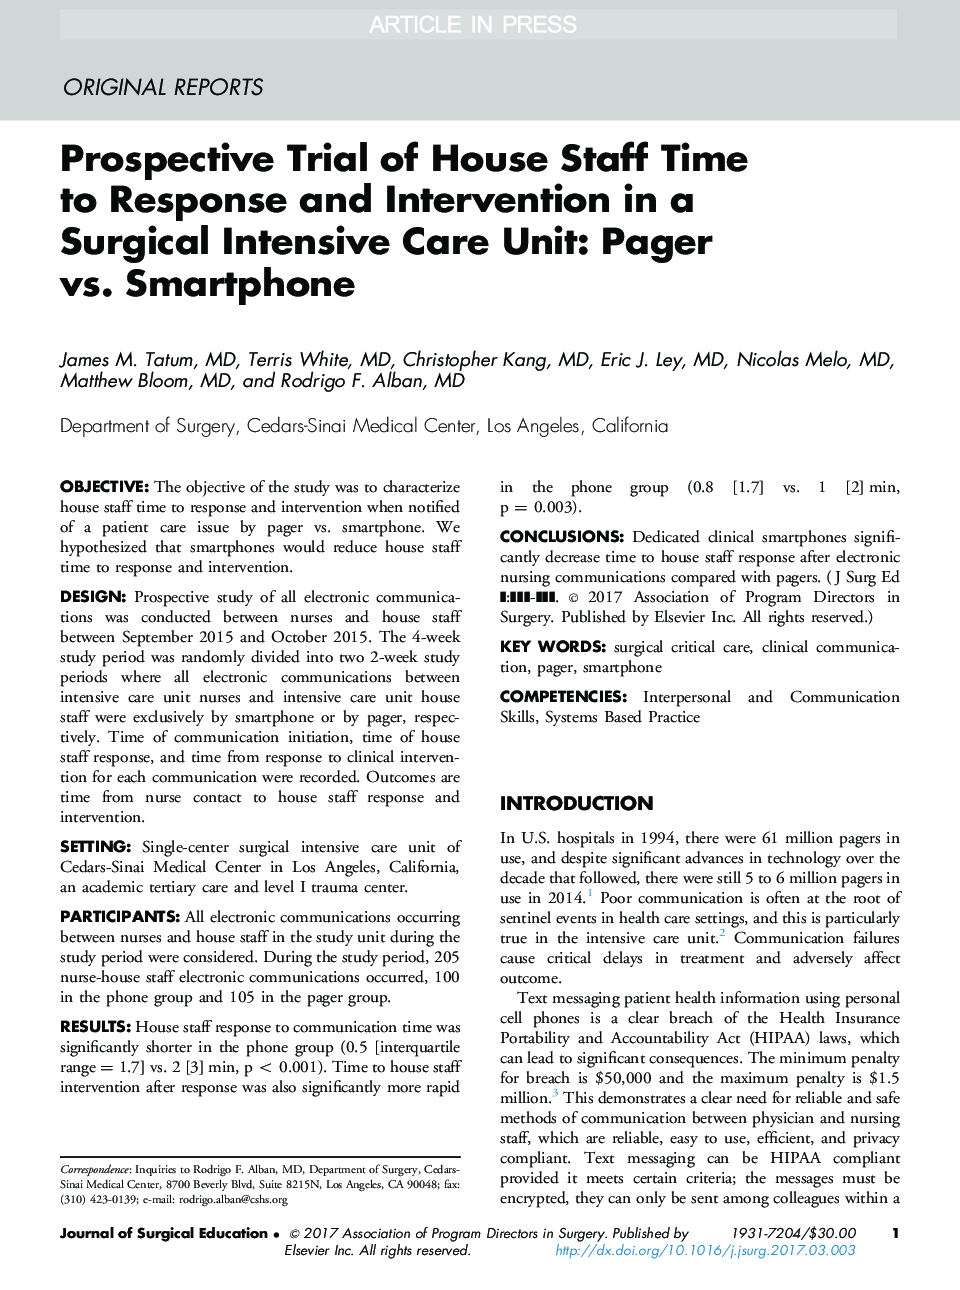 Prospective Trial of House Staff Time to Response and Intervention in a Surgical Intensive Care Unit: Pager vs. Smartphone